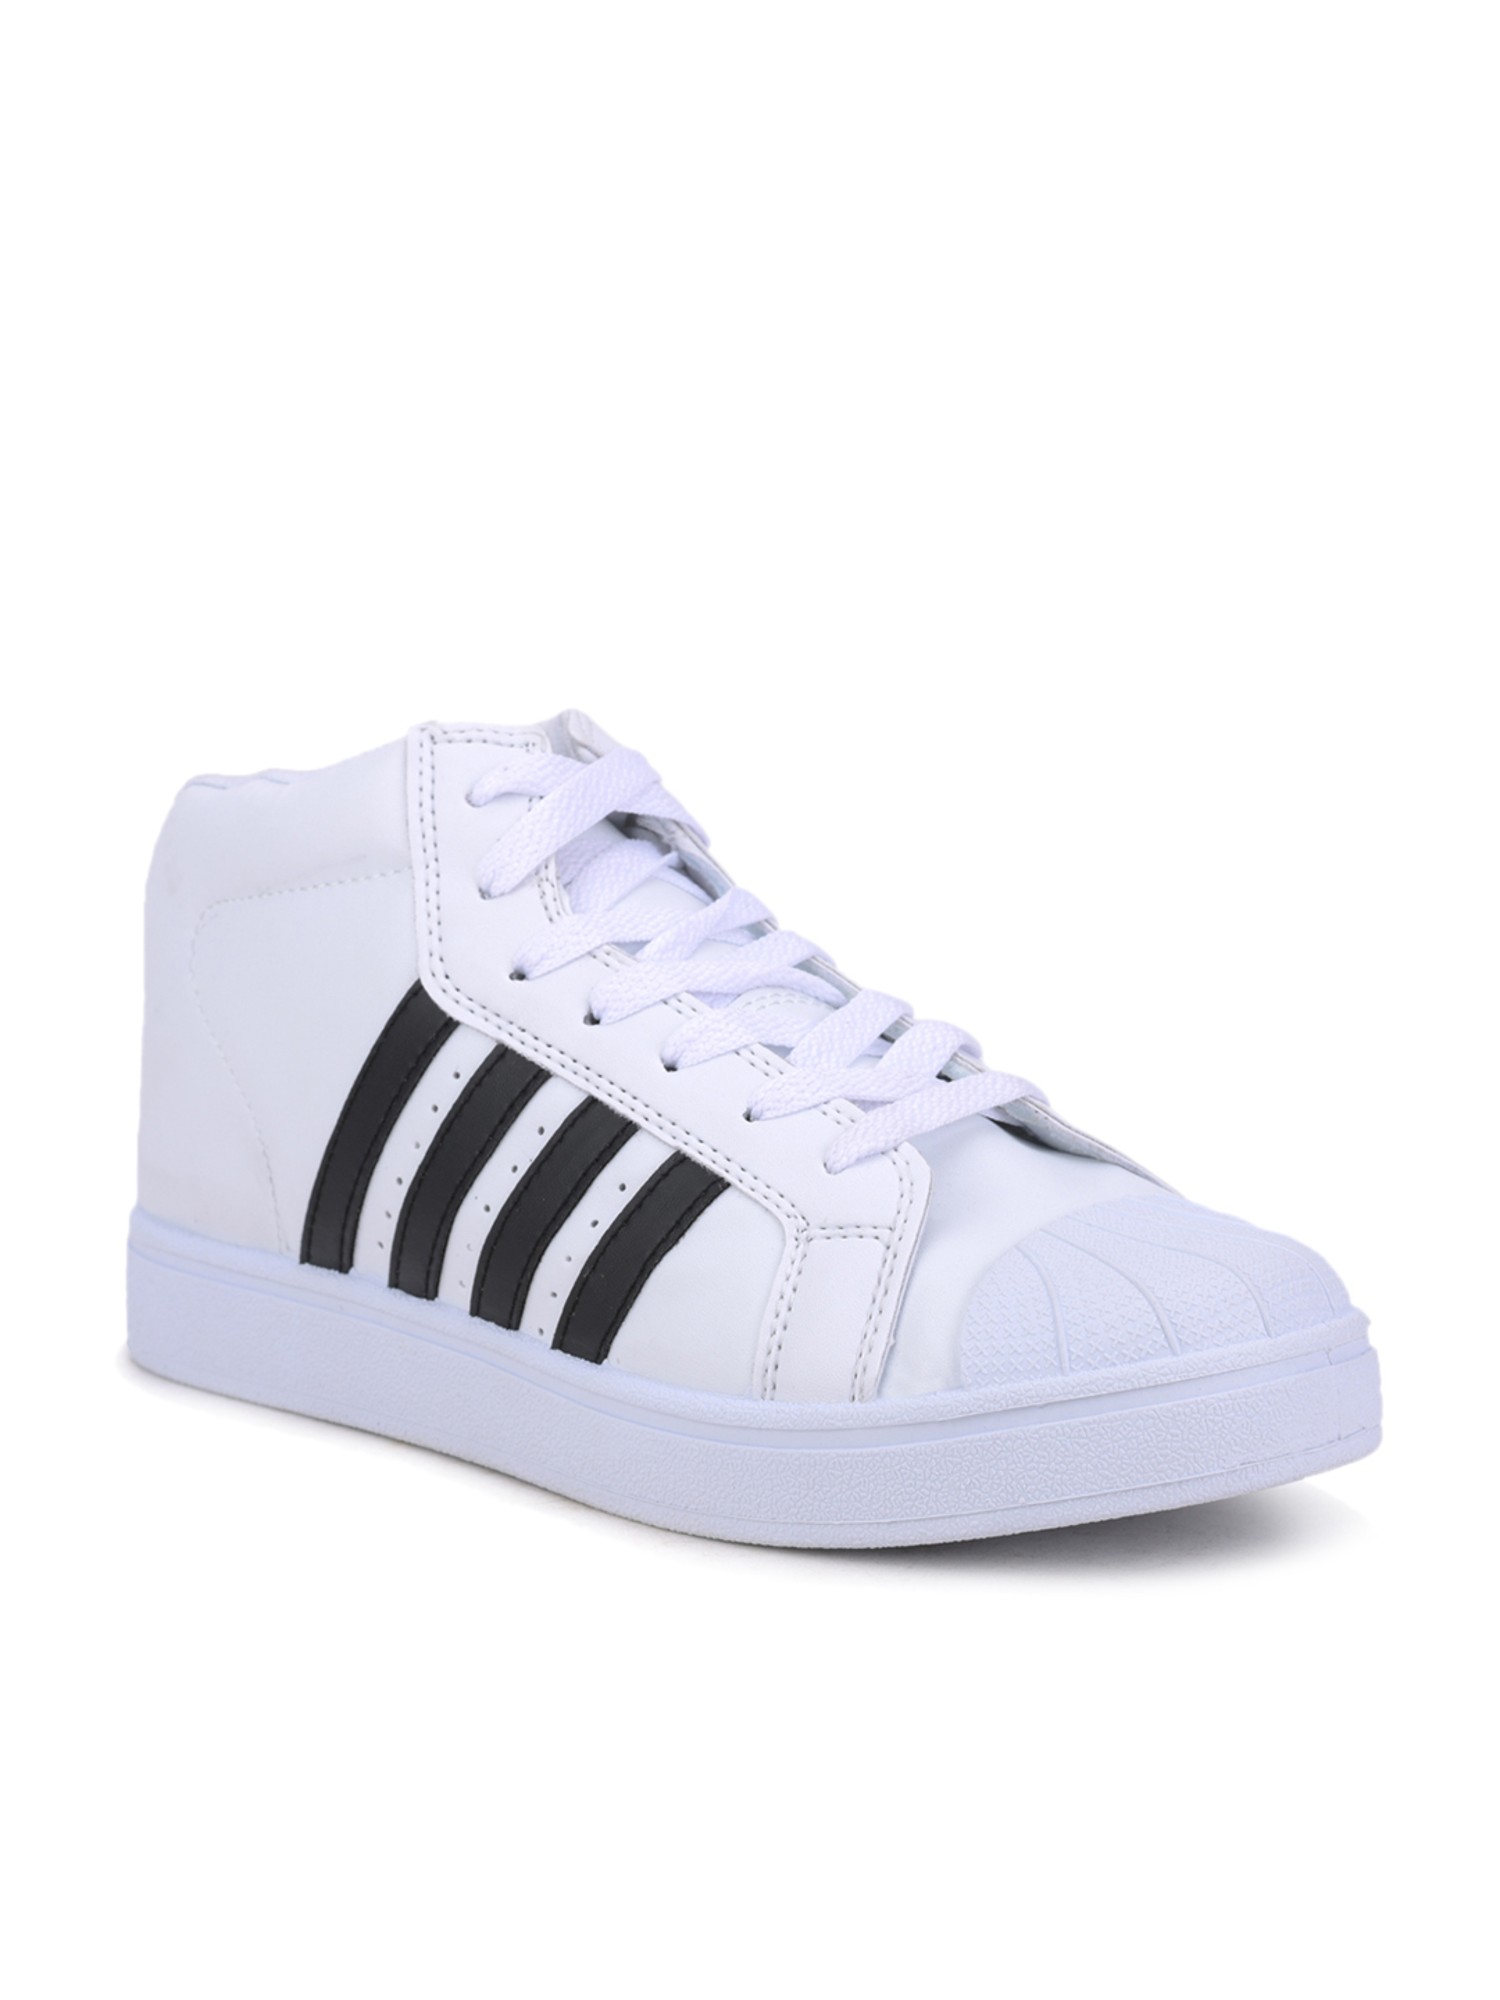 Buy Sparx Men SM-439 White Casual Shoes (Size - 8) at Amazon.in